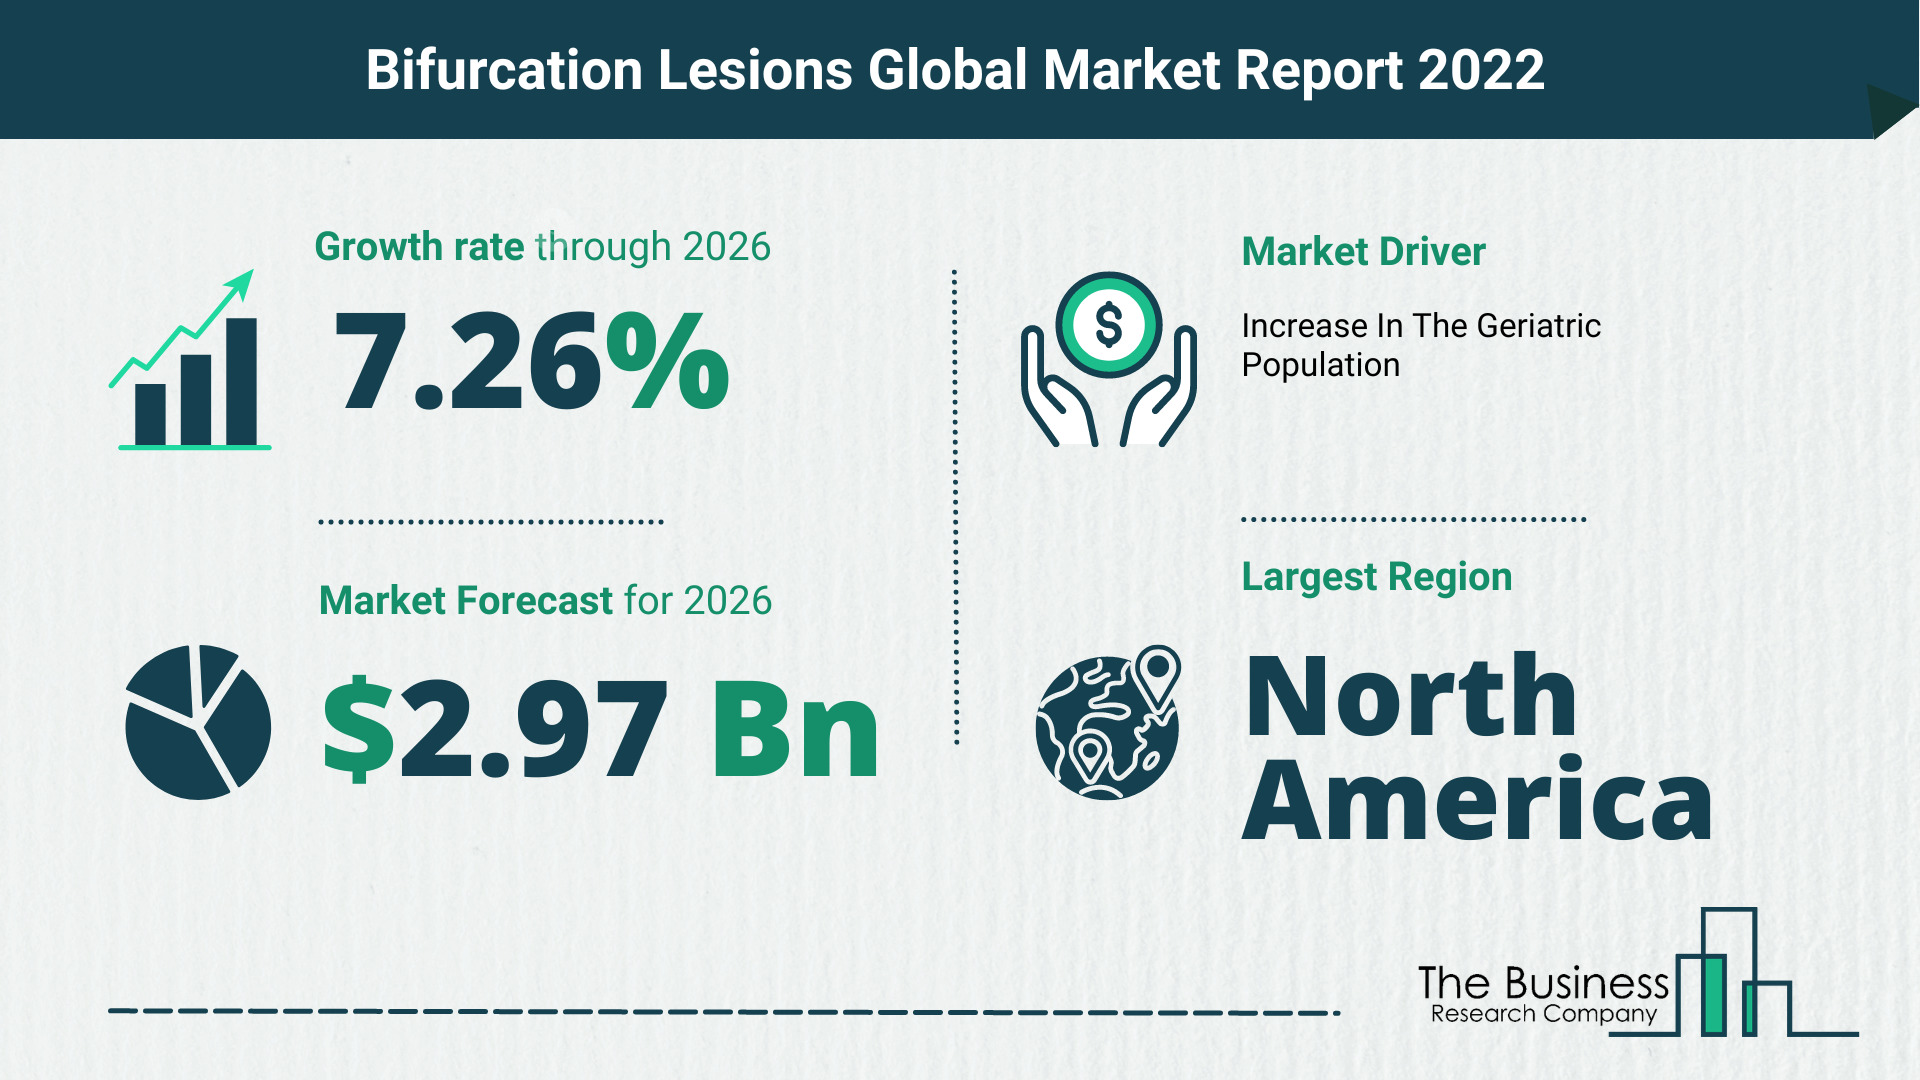 The Bifurcation Lesions Market Share, Market Size, And Growth Rate 2022